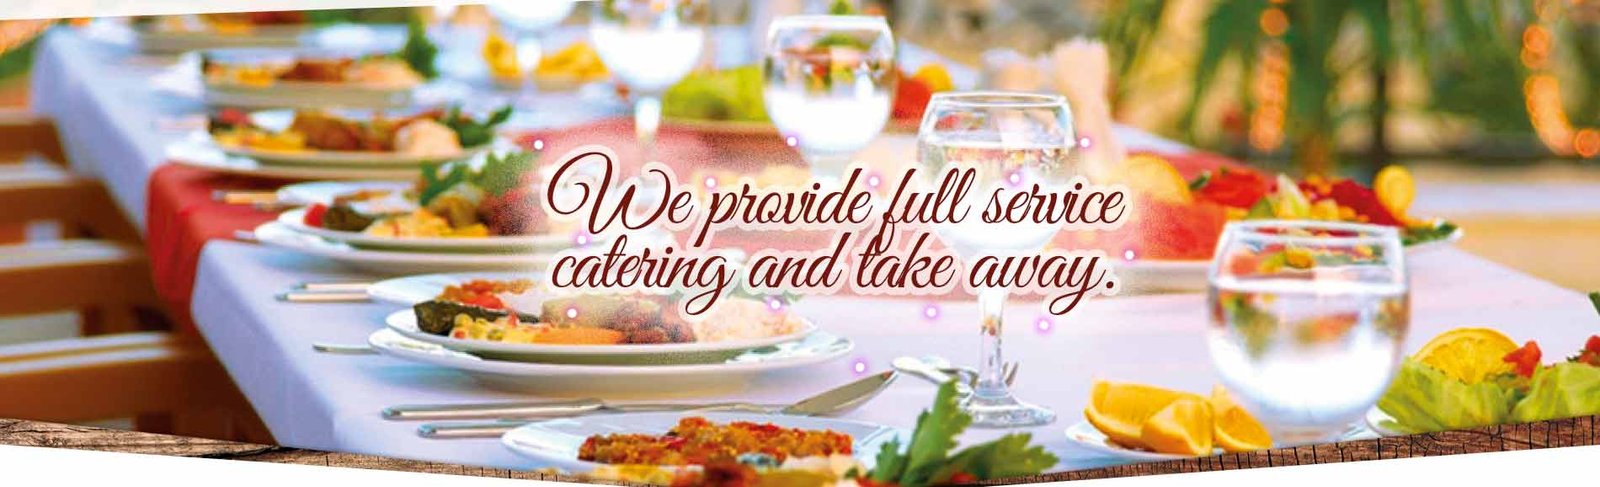 Business Catering services in Beatrice